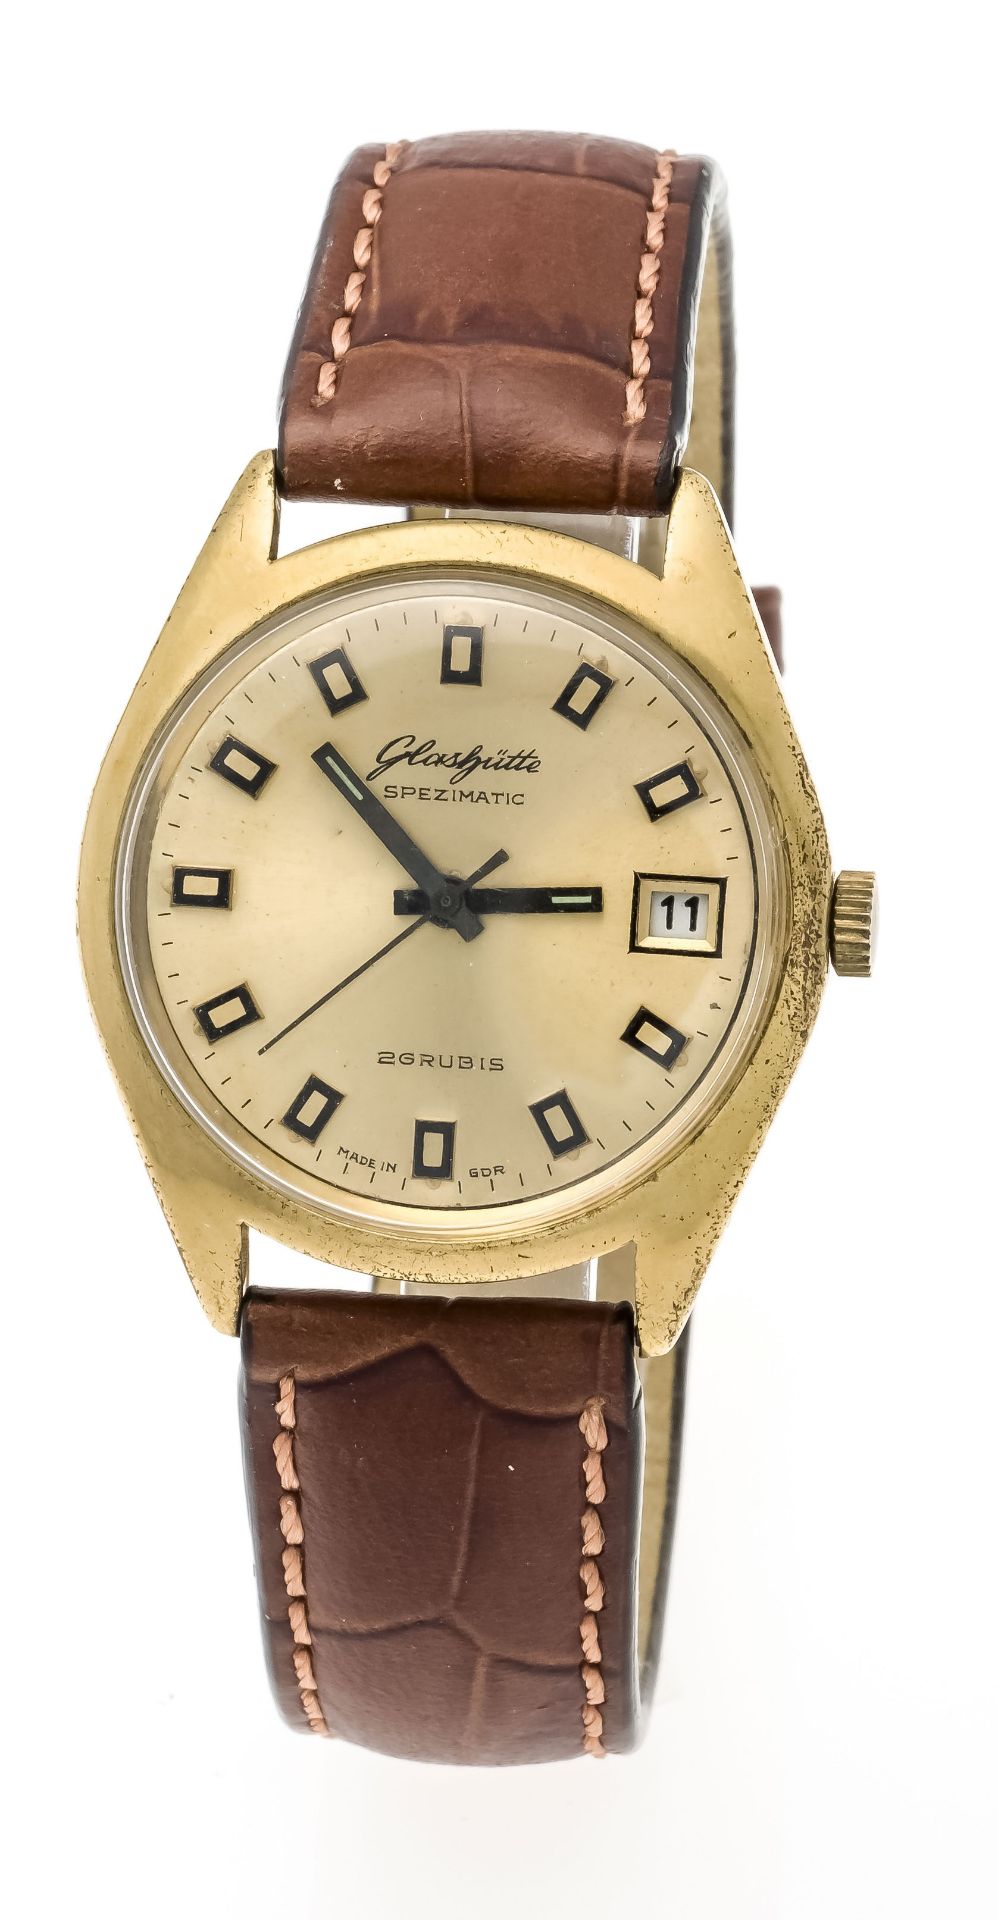 Glashütte Spezimatic automatic Cal. 75, circa 1976, gold-plated case, gold-colored dial with applied